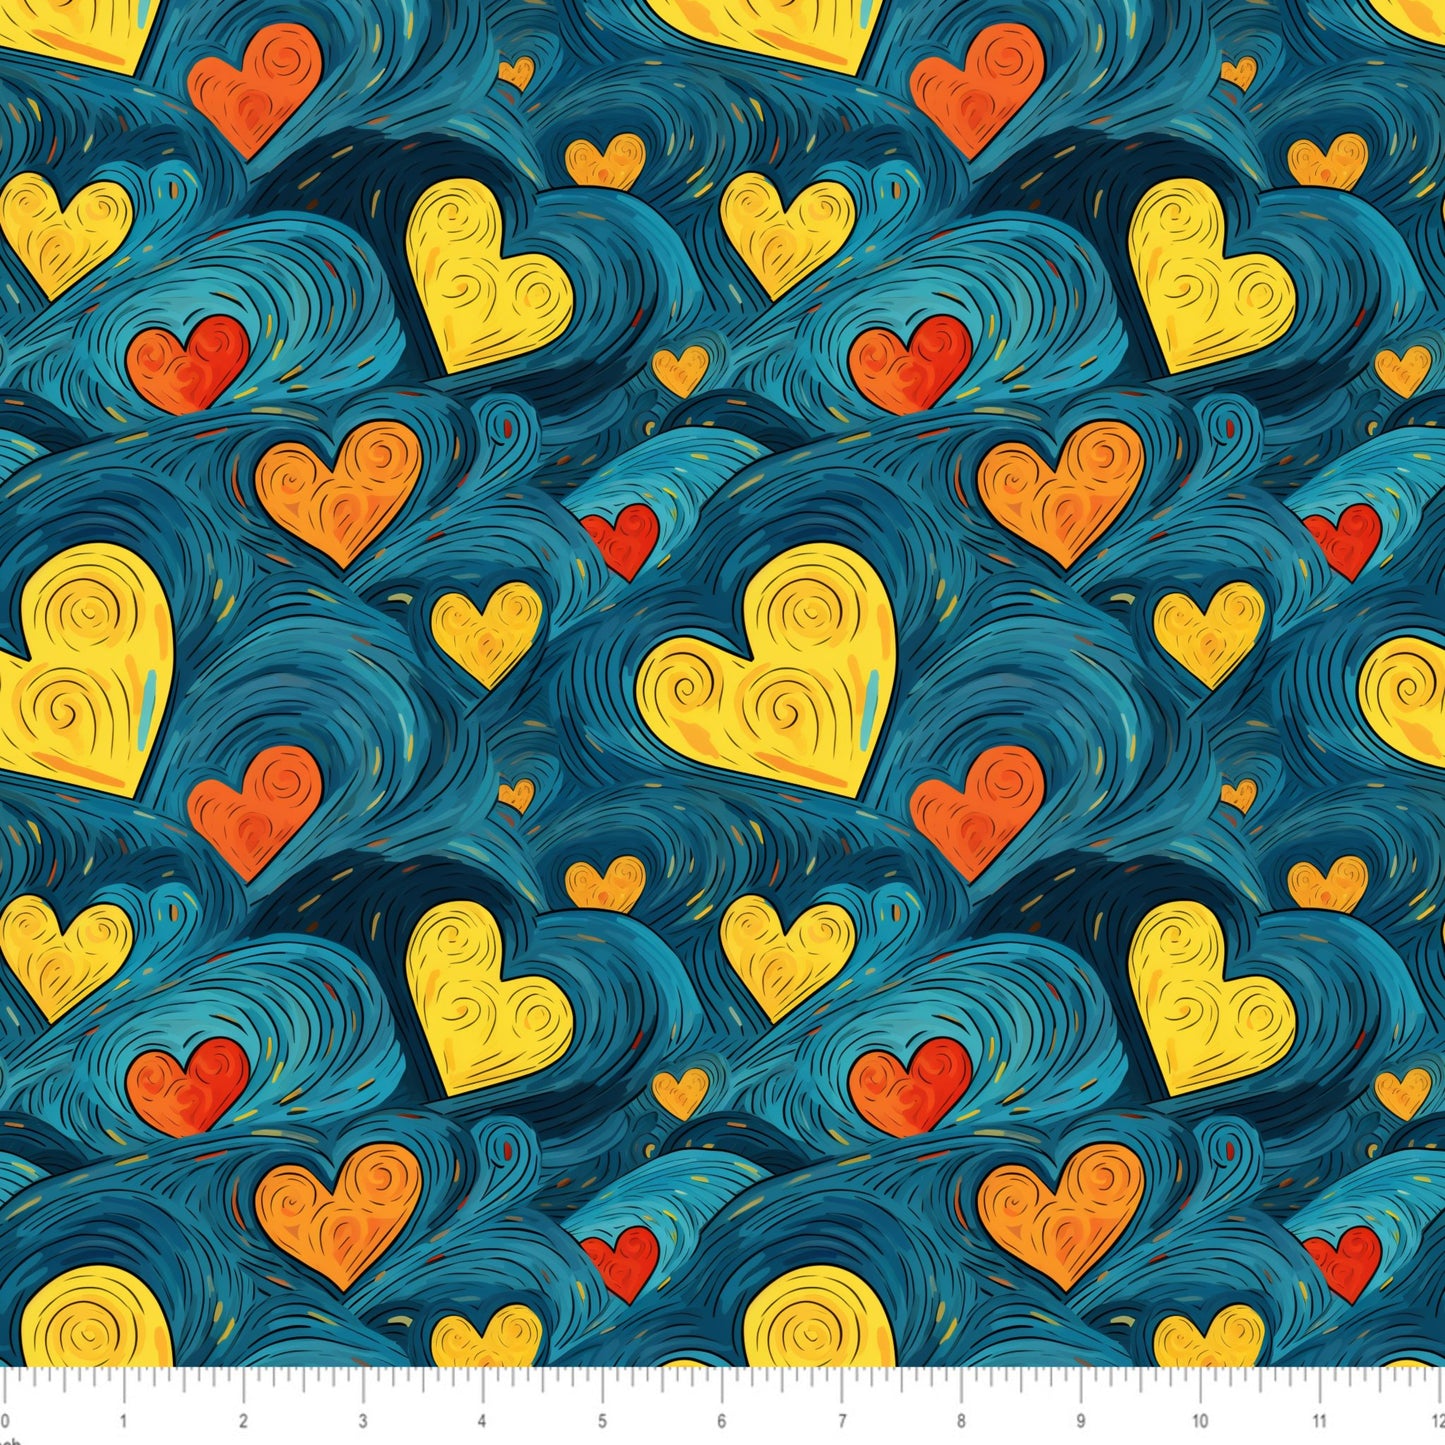 Van Gogh Inspired - Hearts - Little Rhody Sewing Co.